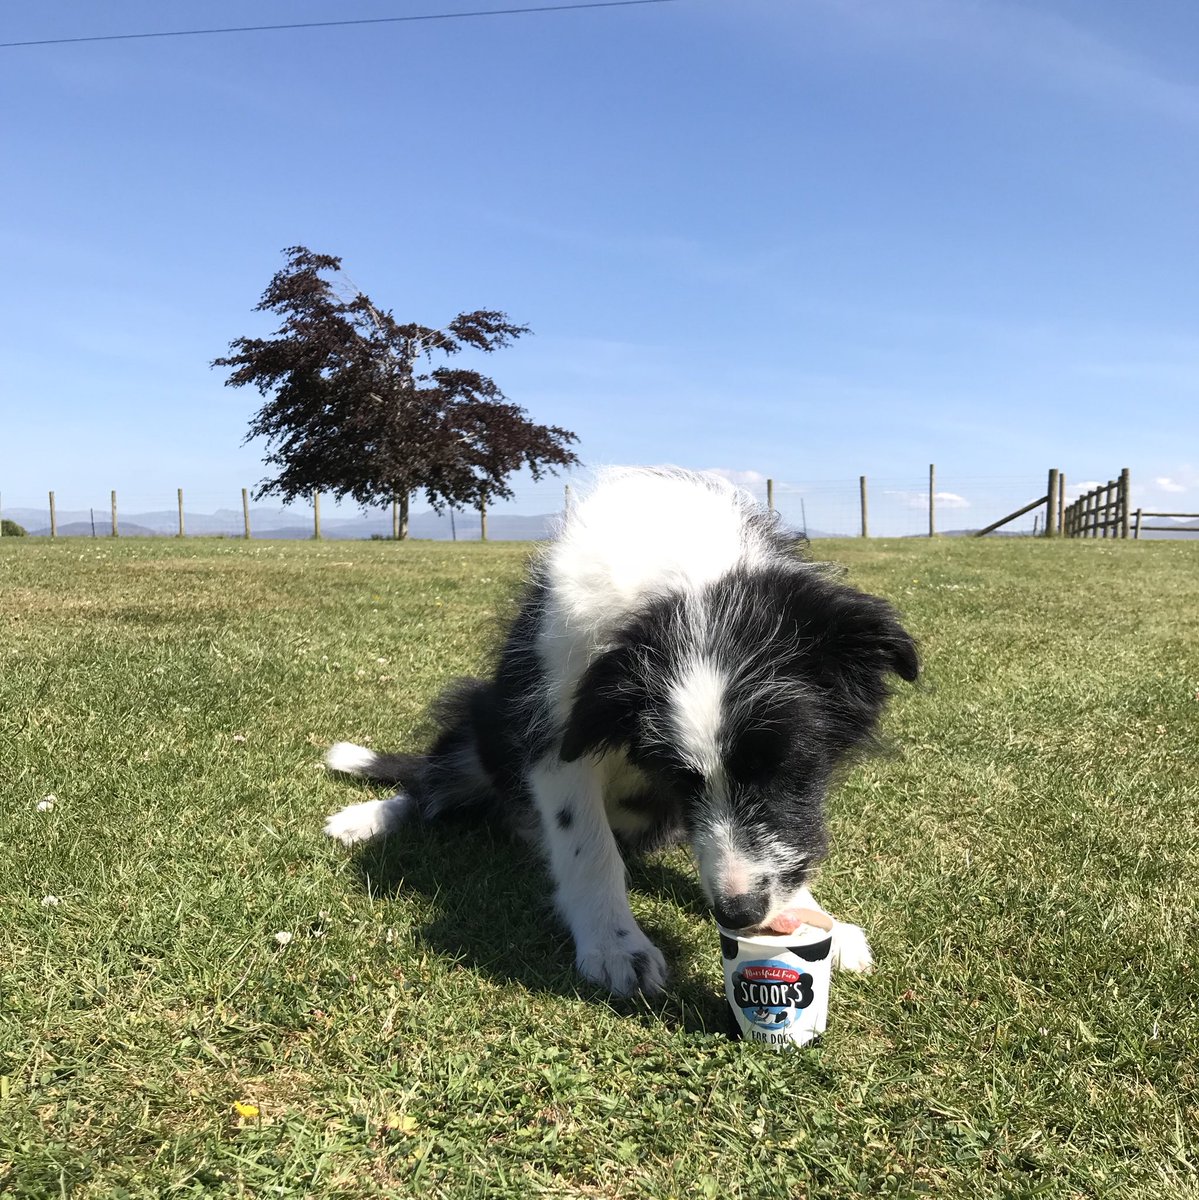 New to our ice cream counter, doggy ice cream from @marshfieldices. Proving to be very popular with our furry friends ... including our very own Little Luna ☺️ #dogicecream #anglesey #foelfarmpark #dog